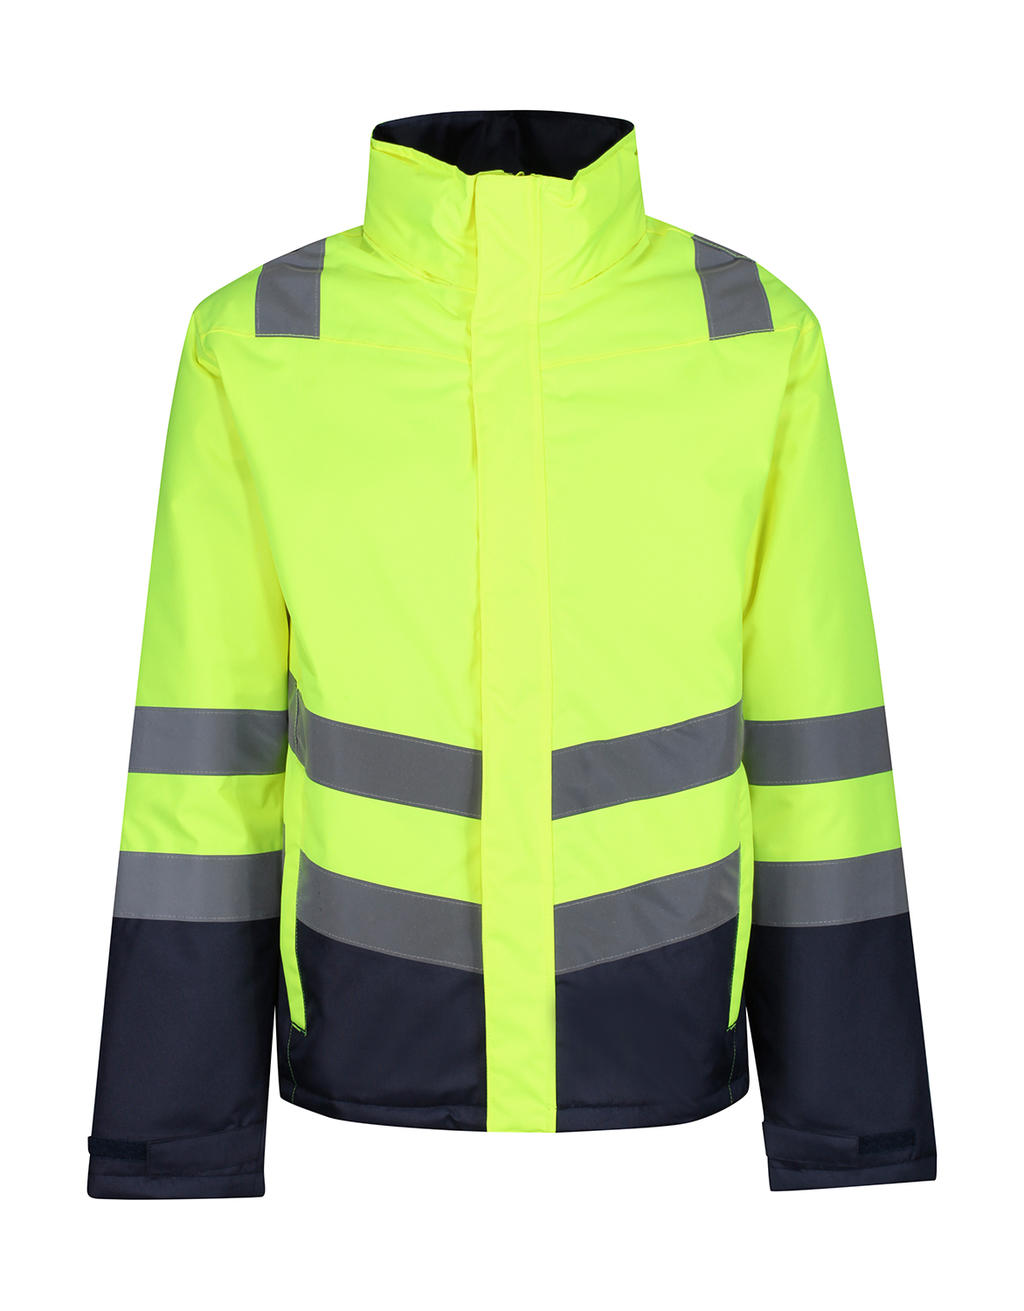  Pro Hi Vis Insulated Parka in Farbe Yellow/Navy